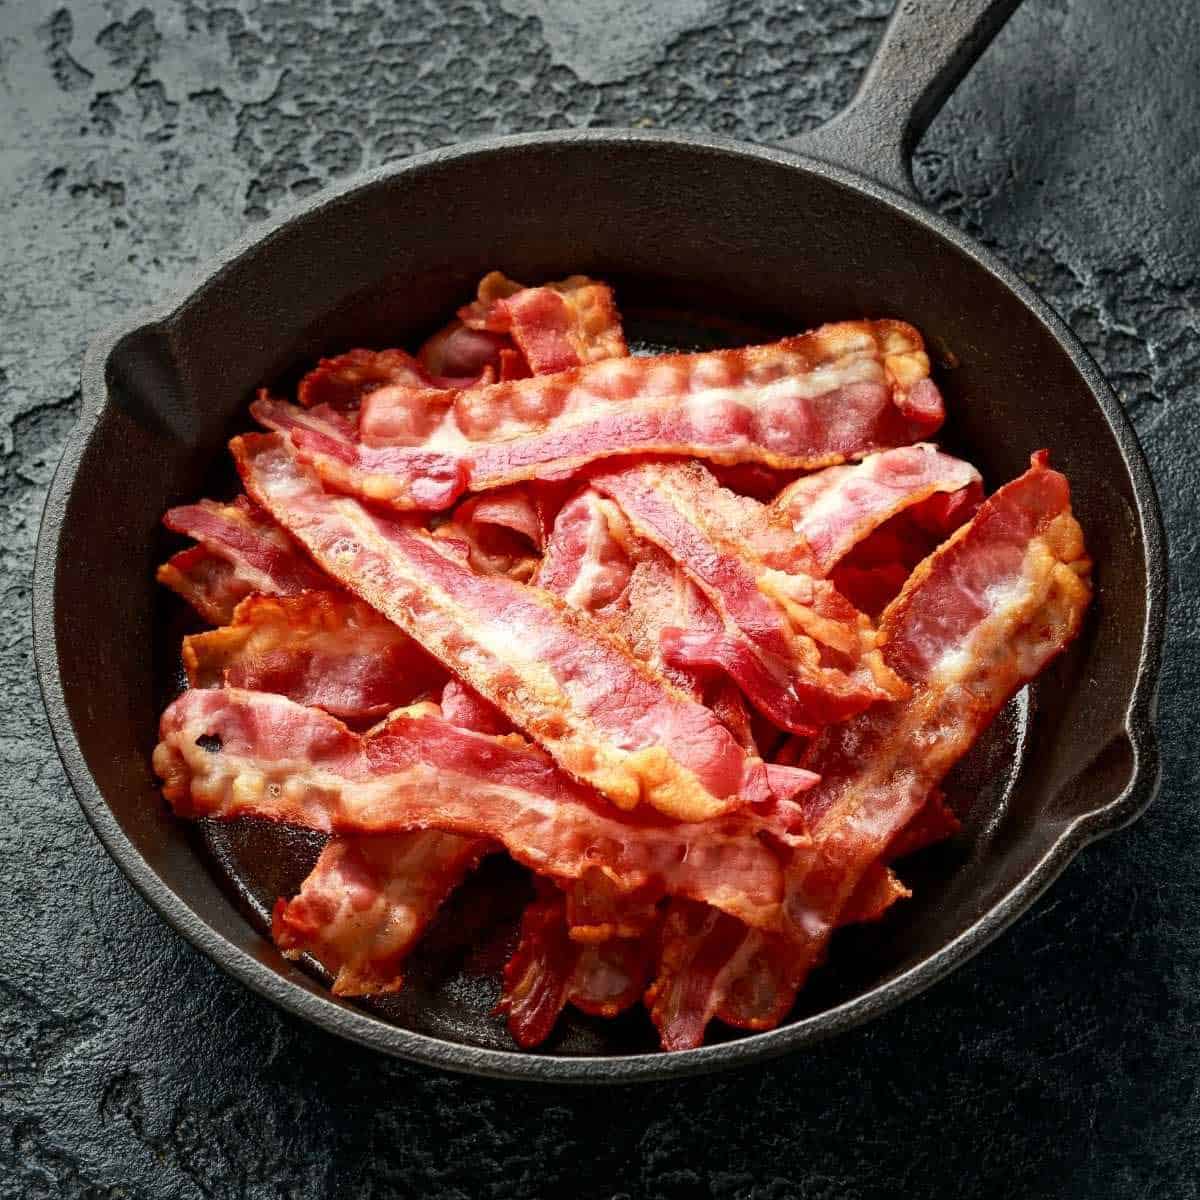 A pound of cooked bacon strips in a black skillet on a mottled black background.